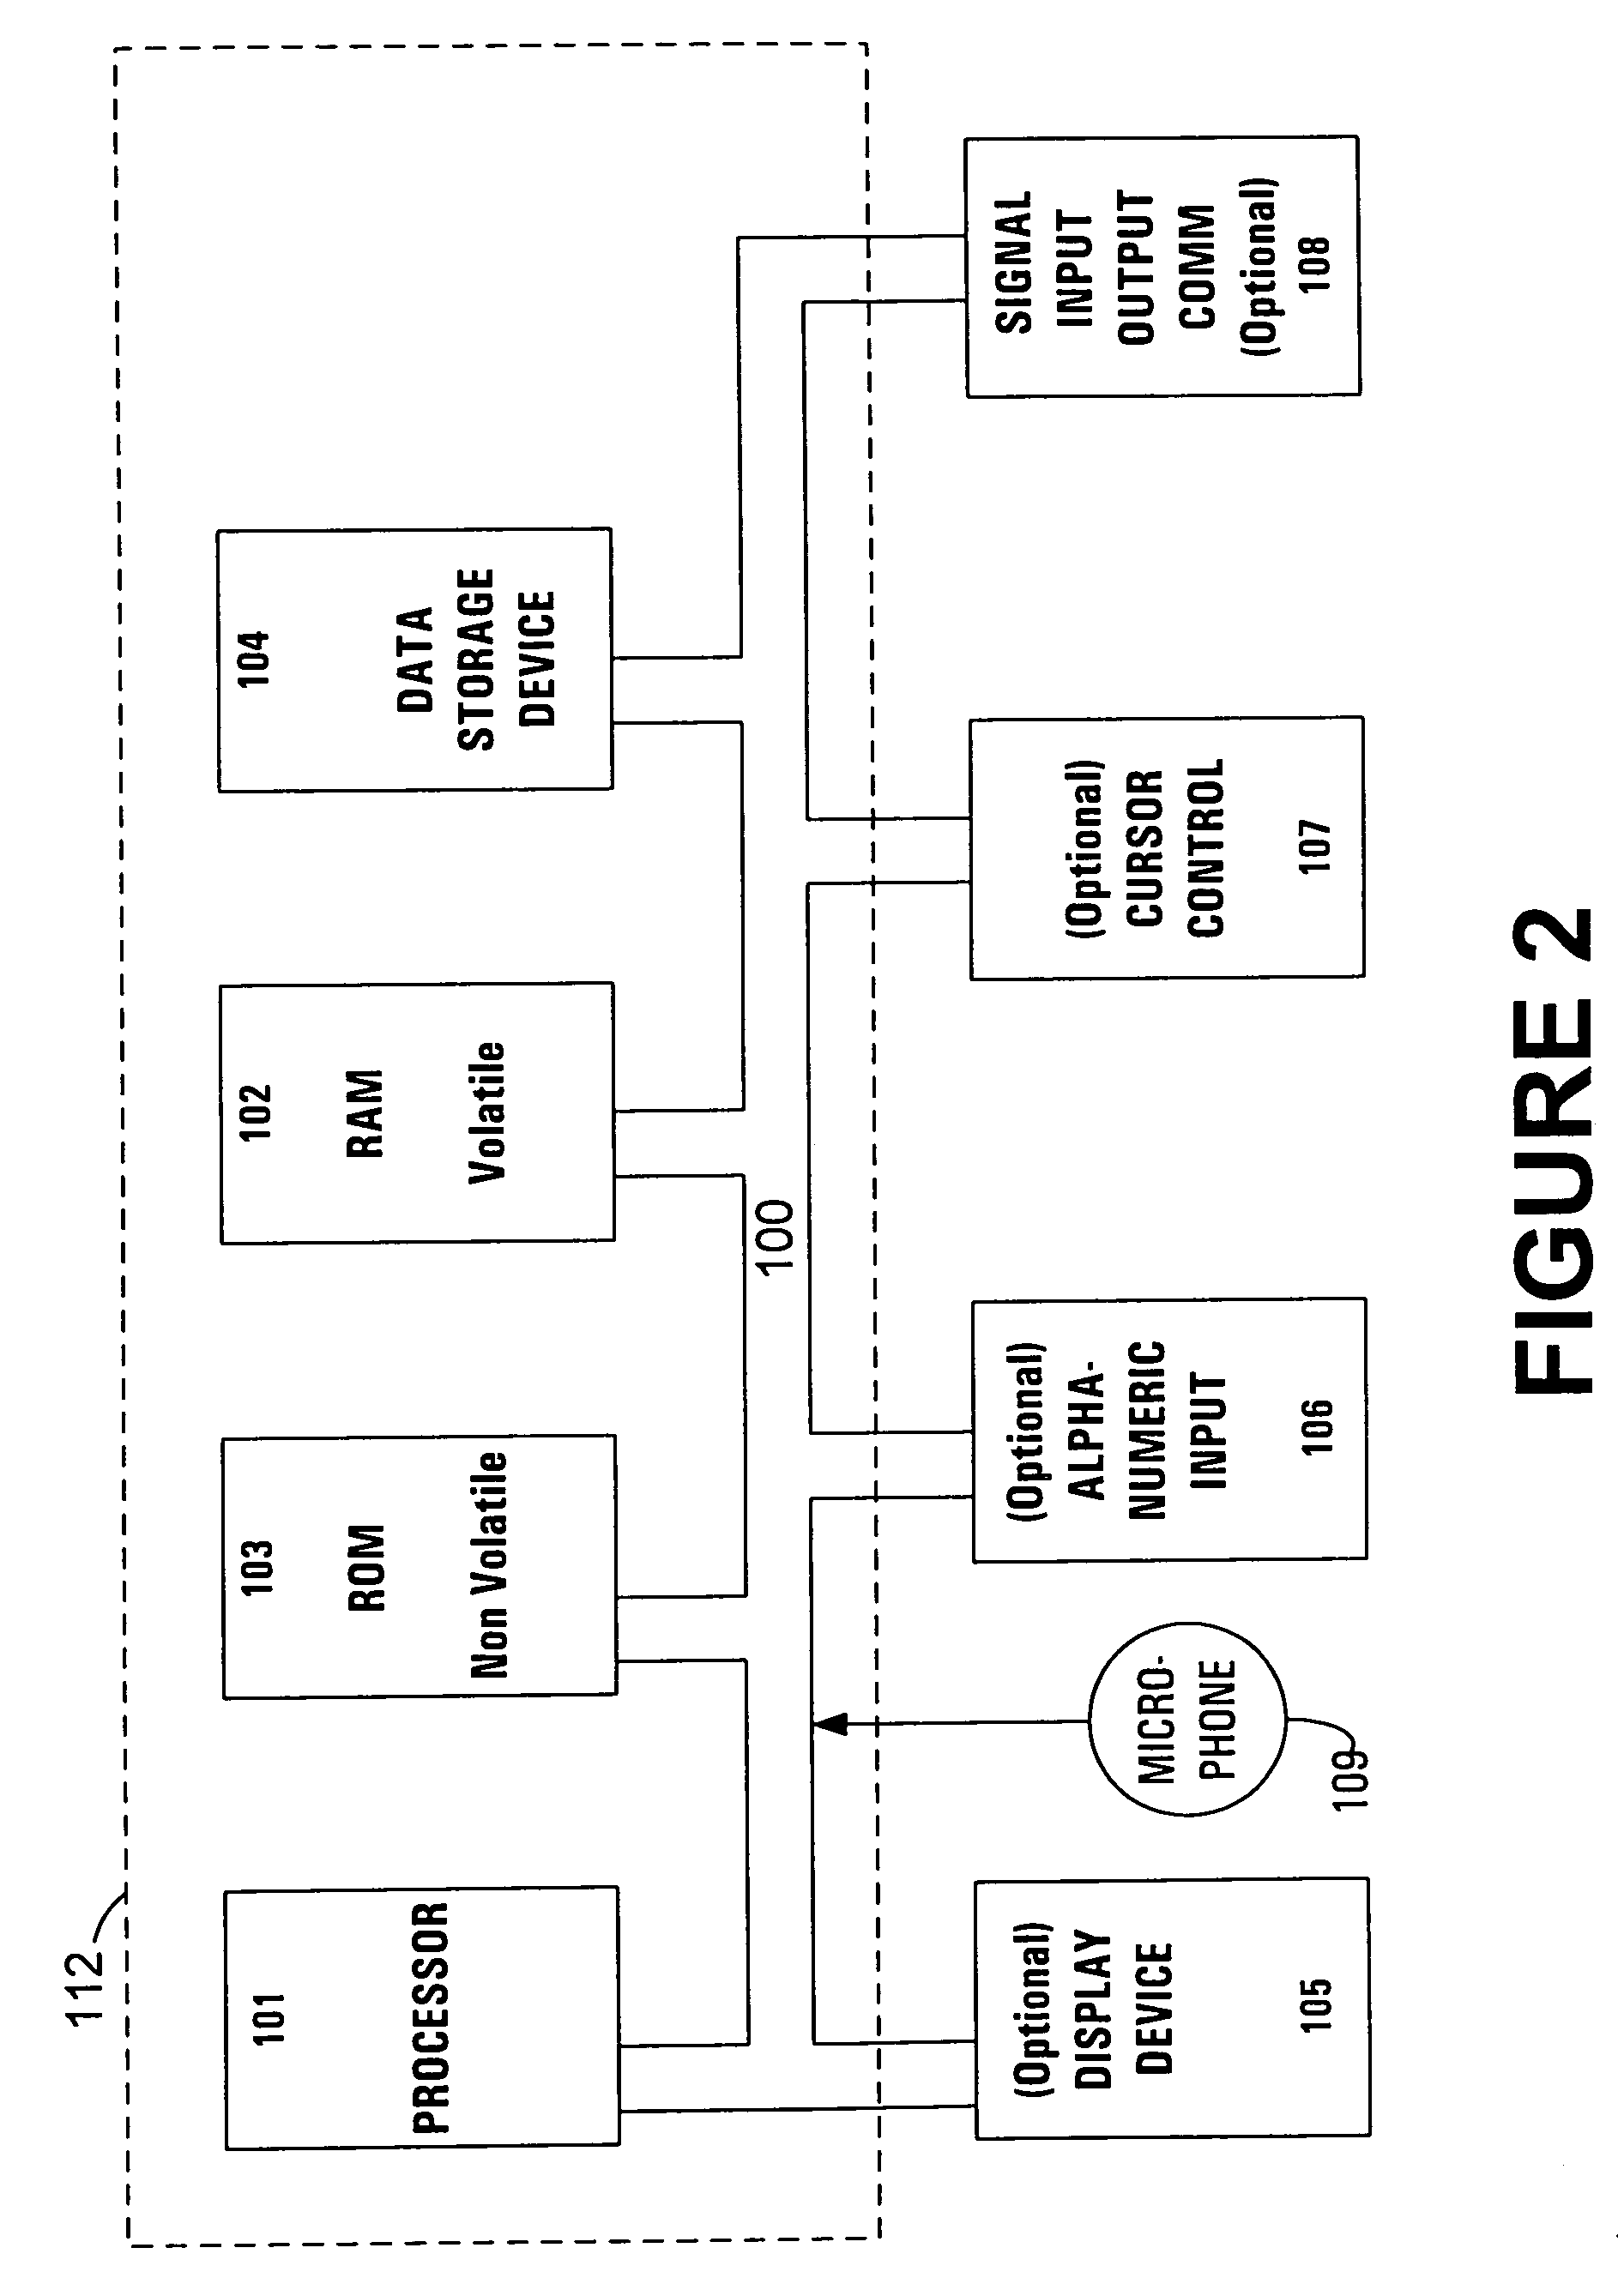 Method and system for ensuring continuous data flow between re-transmitters within a chaincast communication system